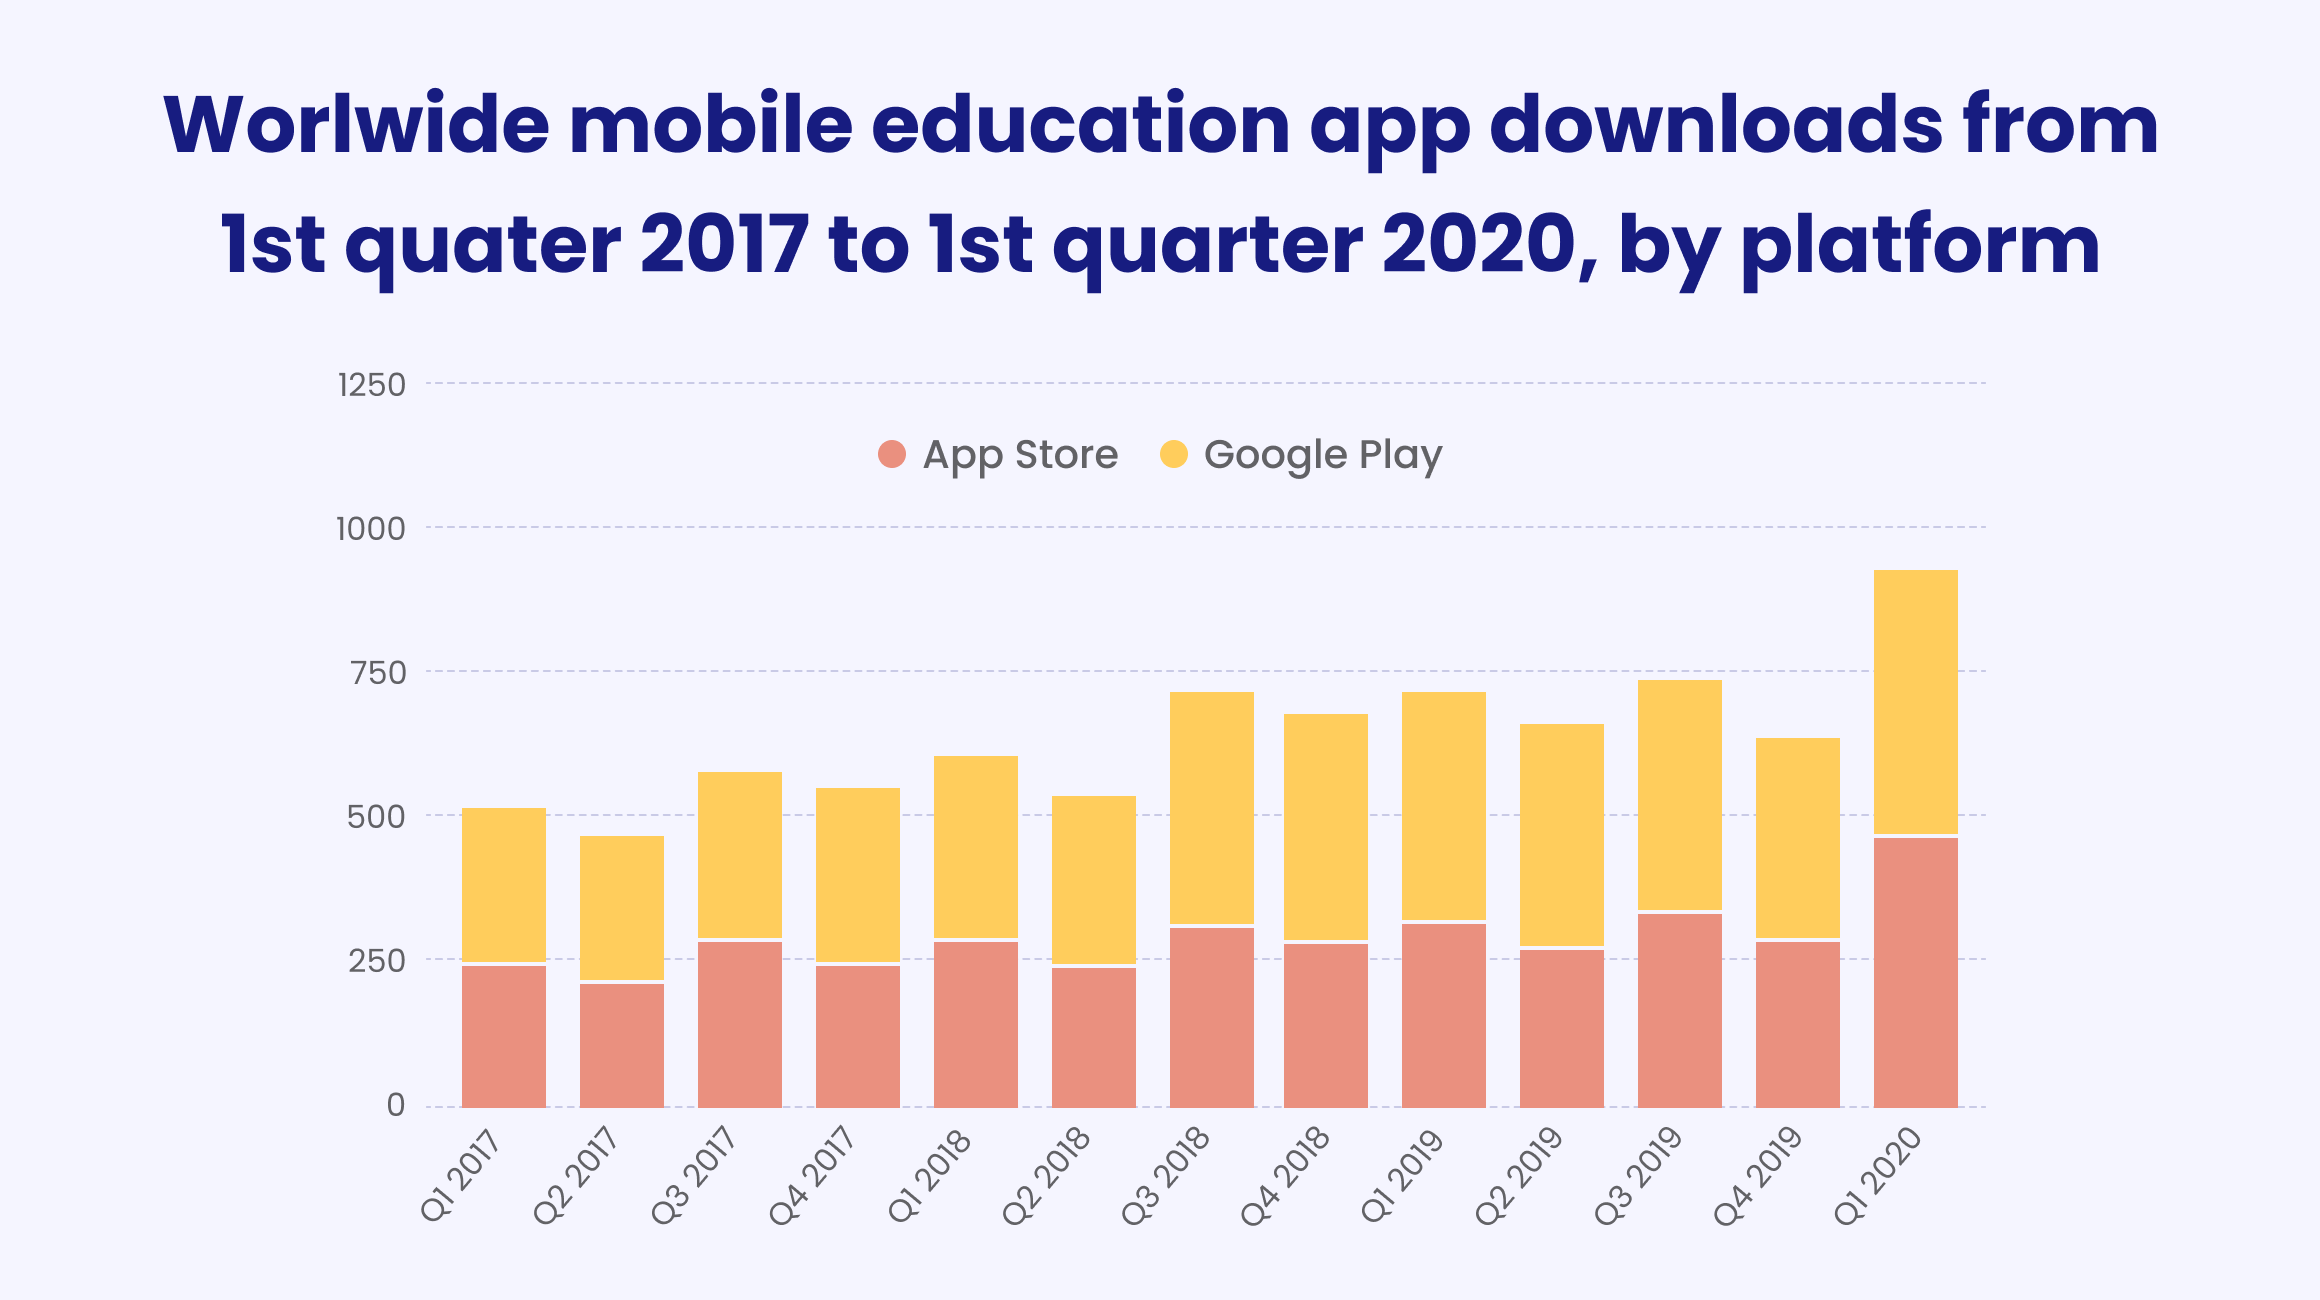 Global educational apps downloads